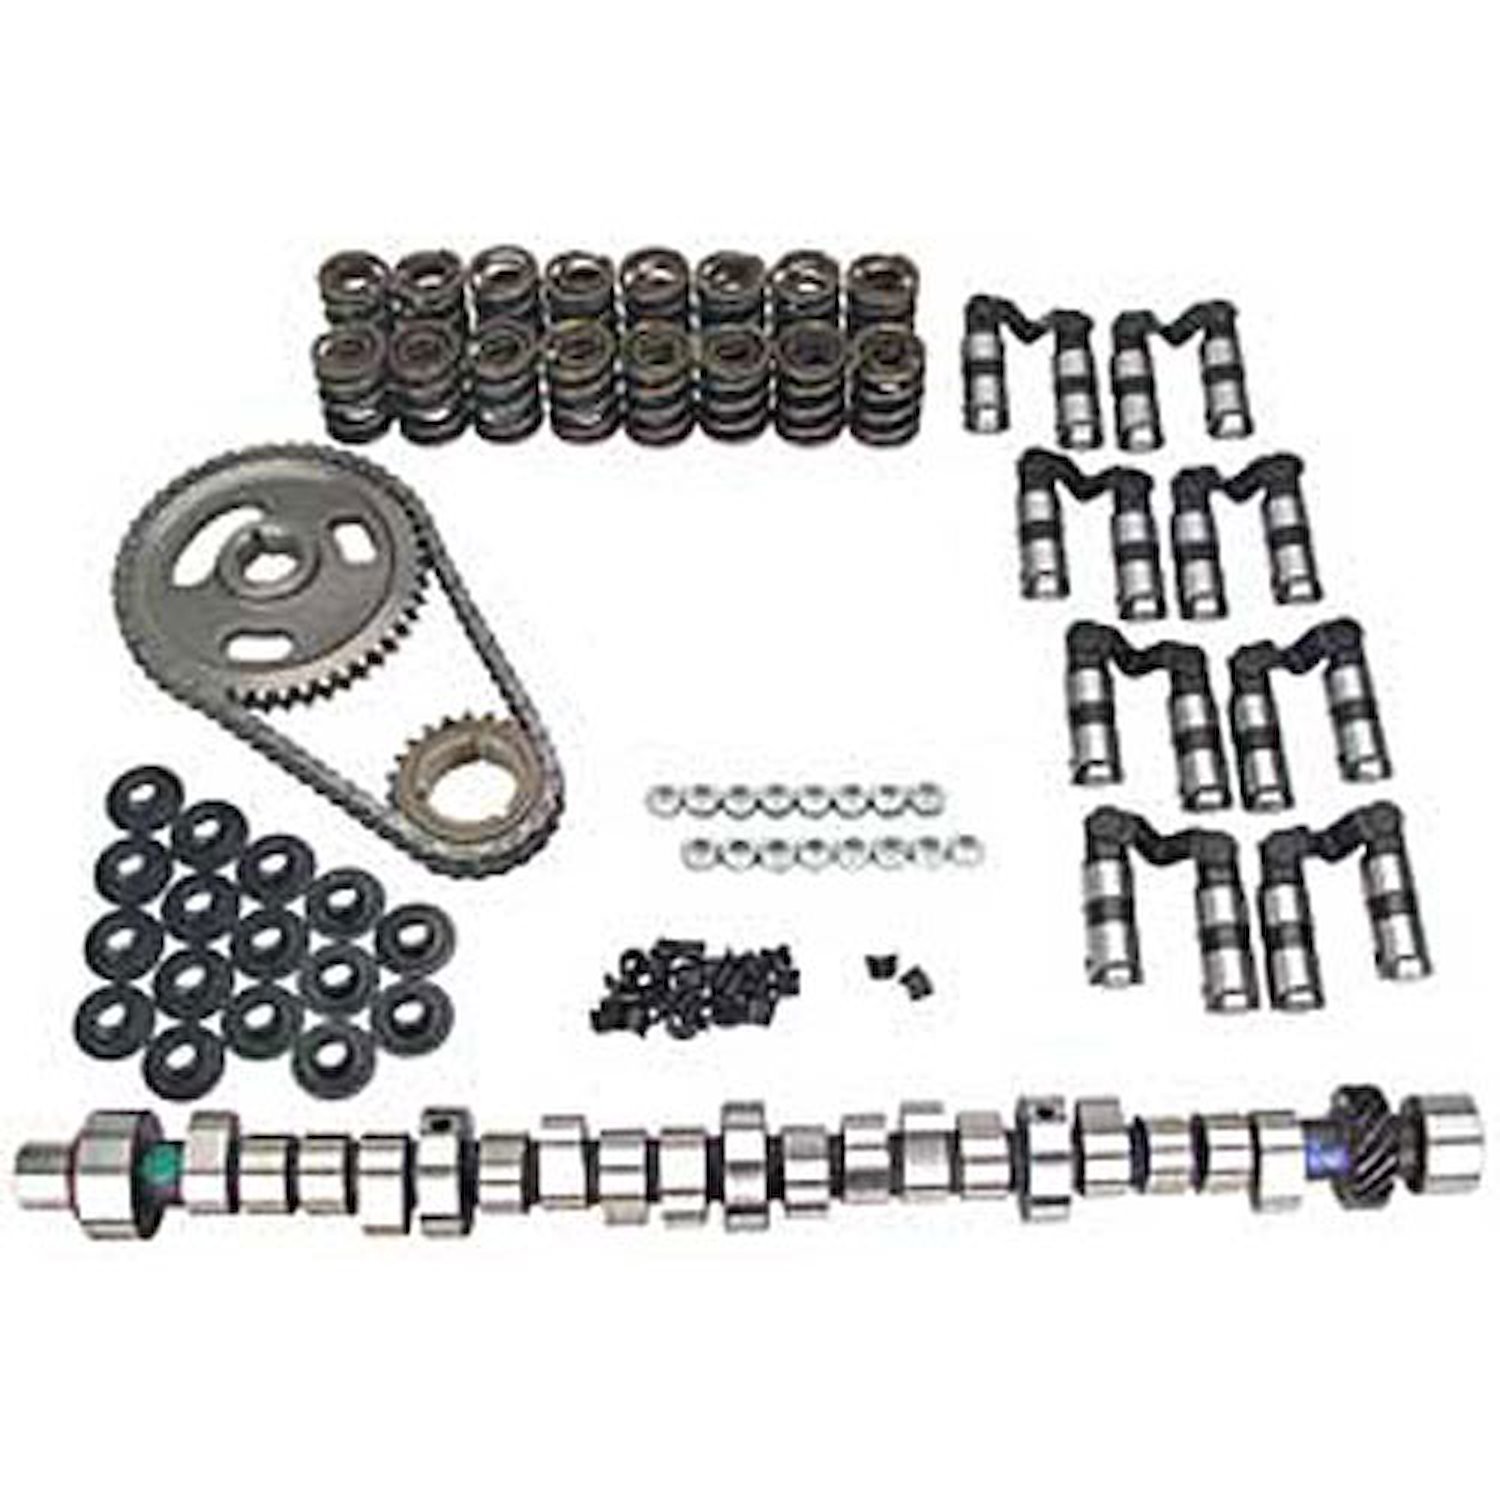 Magnum Mechanical Roller Cam Complete Kit Chevy Small Block 262-400ci 1955-98 Lift: .550"/.550"